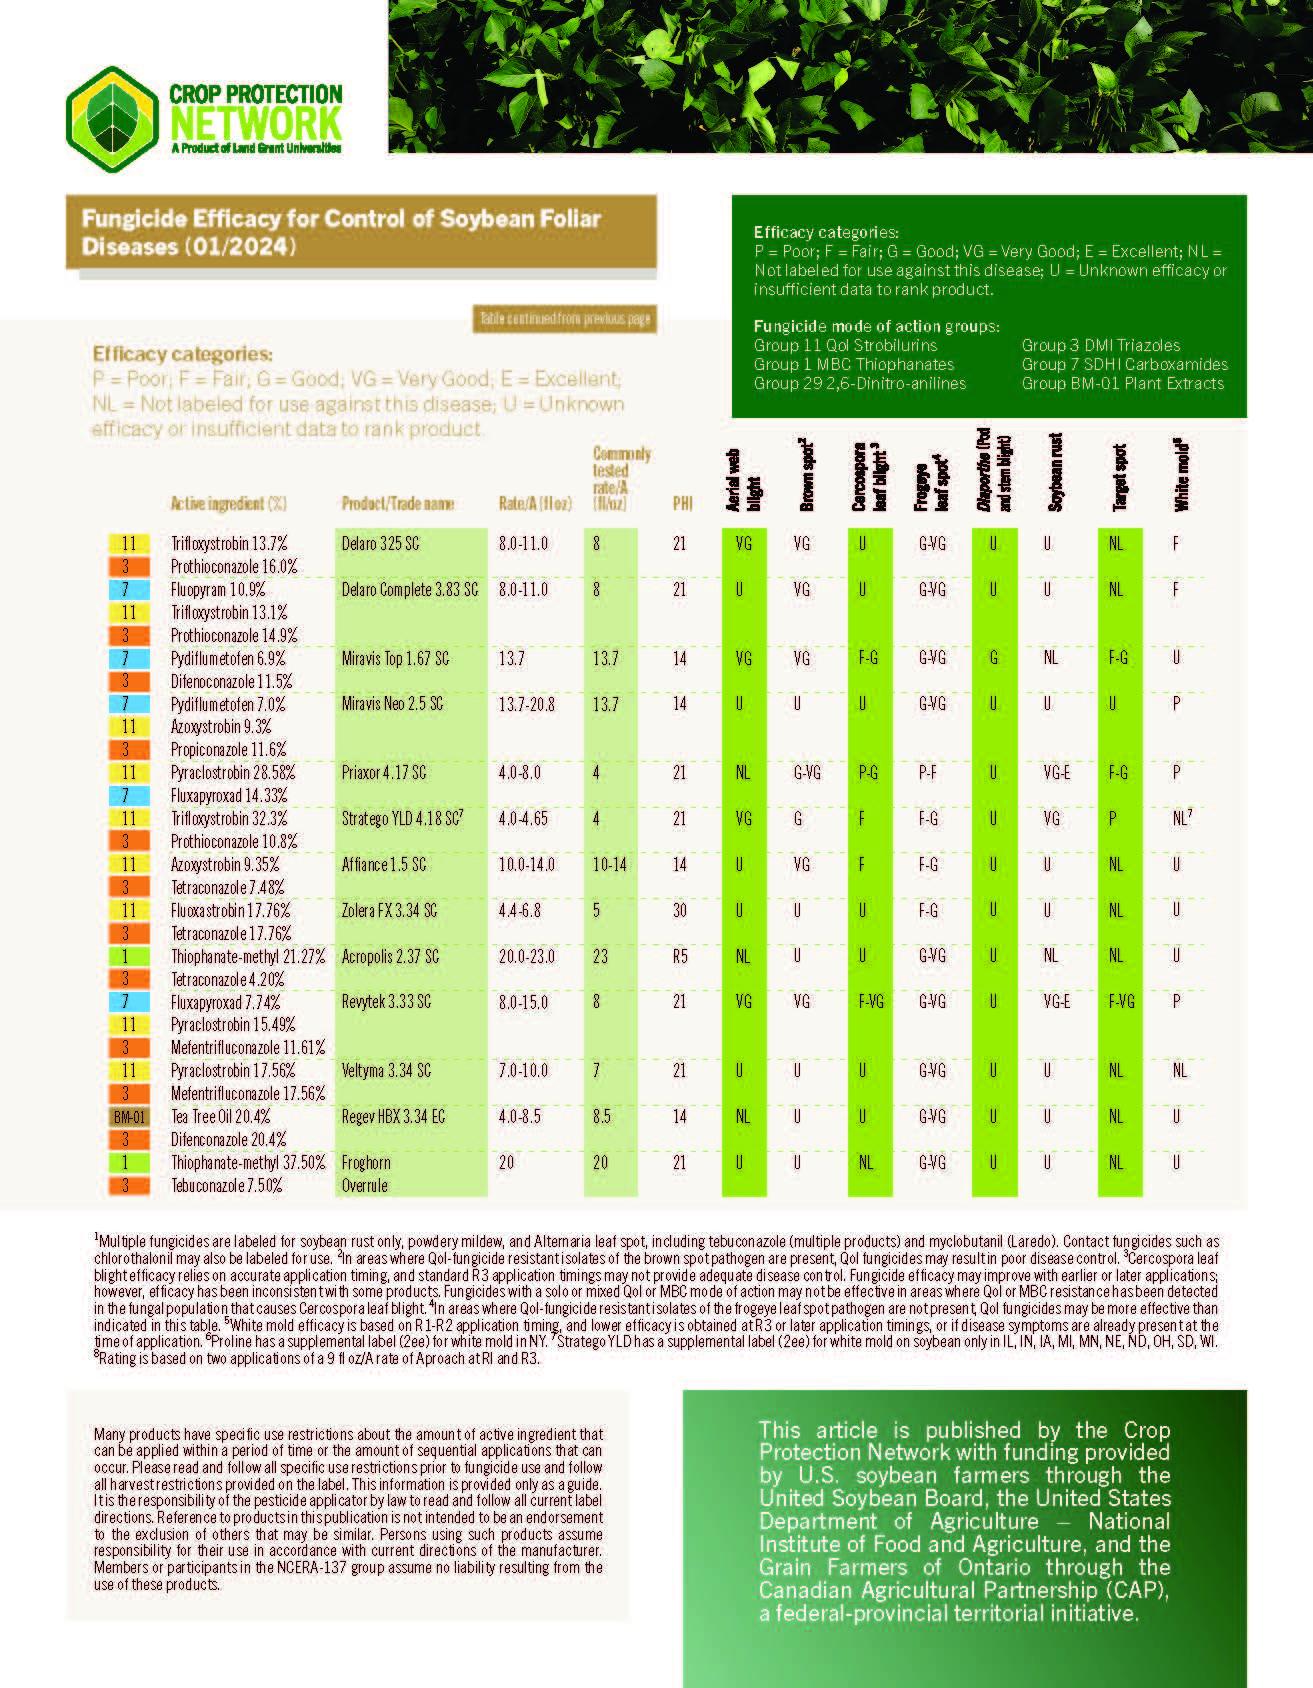 Fungicide Efficacy for Control of Soybean Follar Diseases-page3